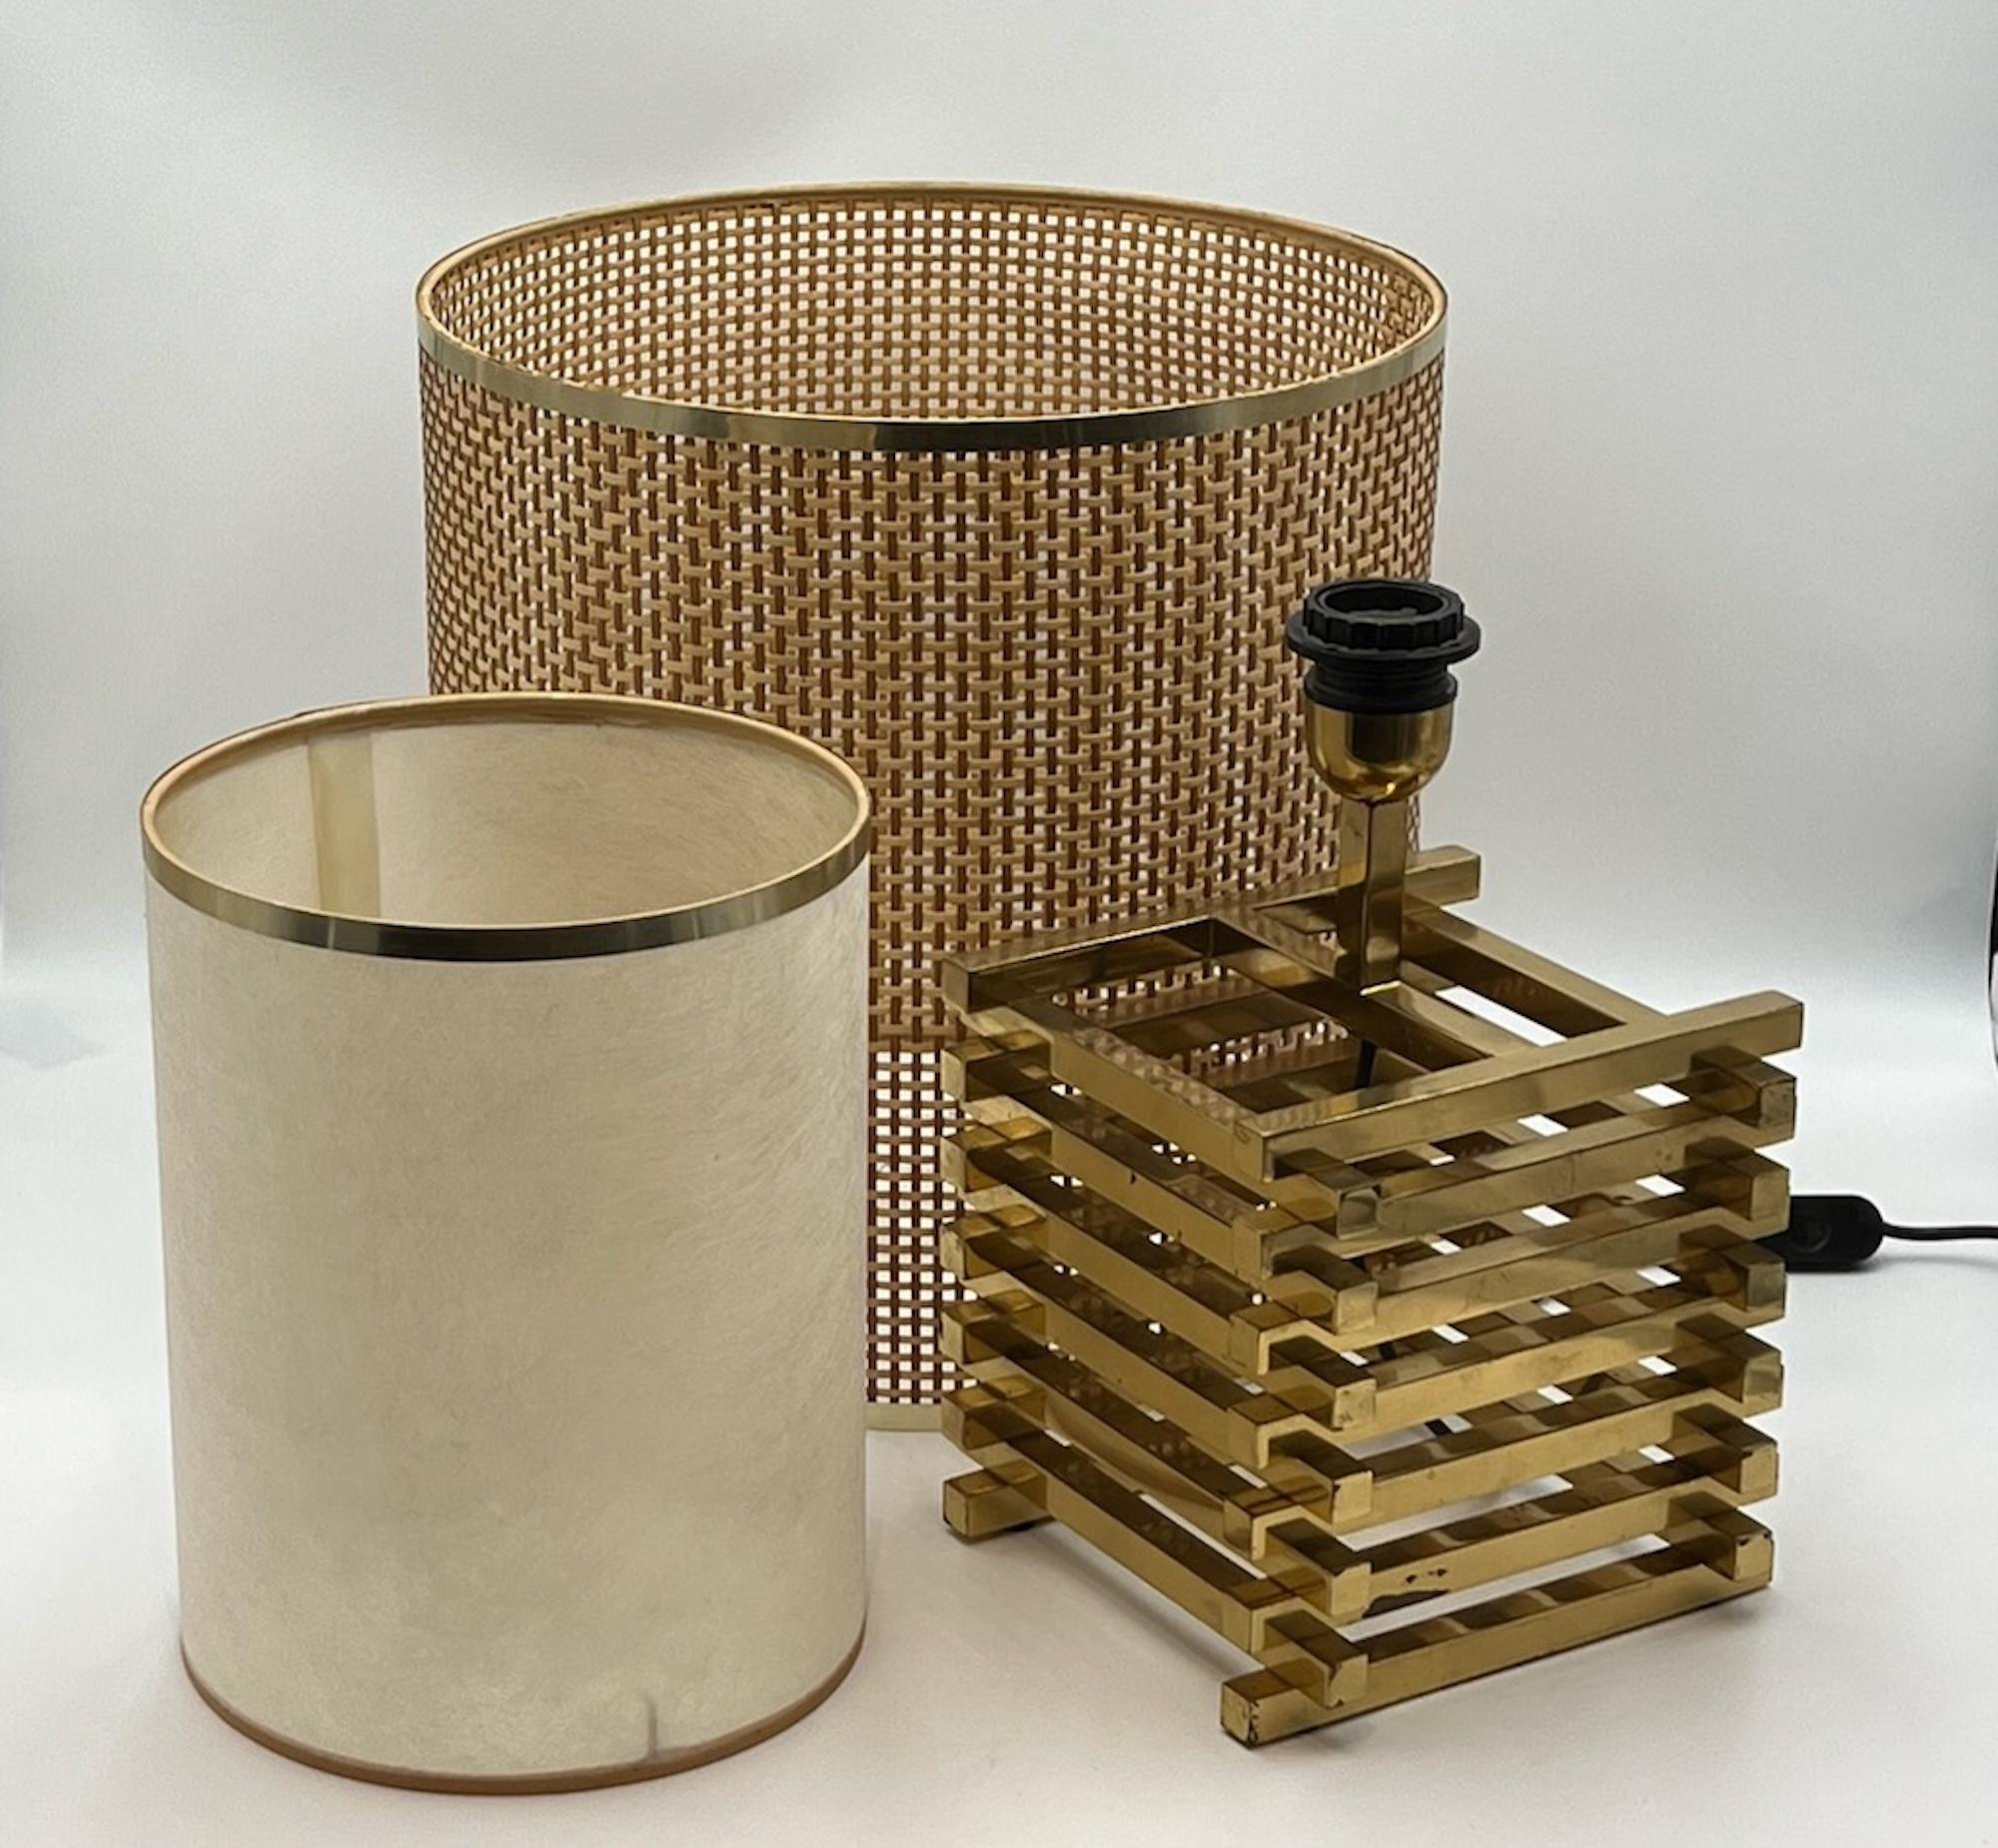 Rare and beautiful 60s vintage table lamp 'Spiga' with heavy brass base and large wicker lampshade designed by Enrico Tronconi.

This handmade lamp is made of 28 interlocked brass bars that supports the bulb holder. The quality of materials is